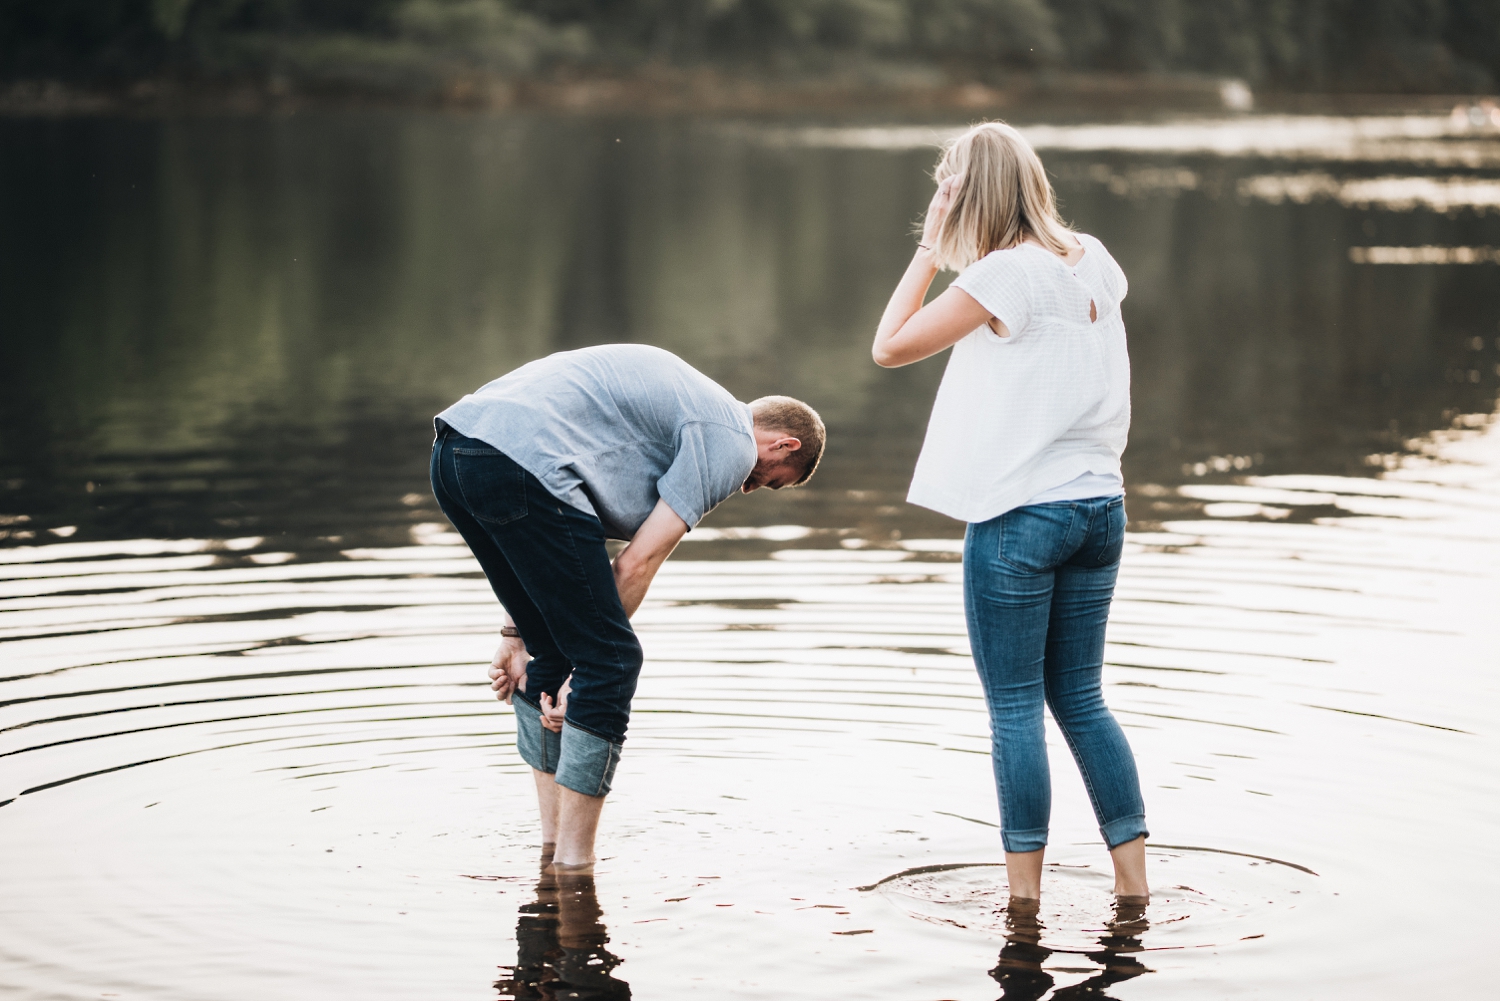 Fun Summer engagement photos in Eau Claire Wisconsin tom thornton photography